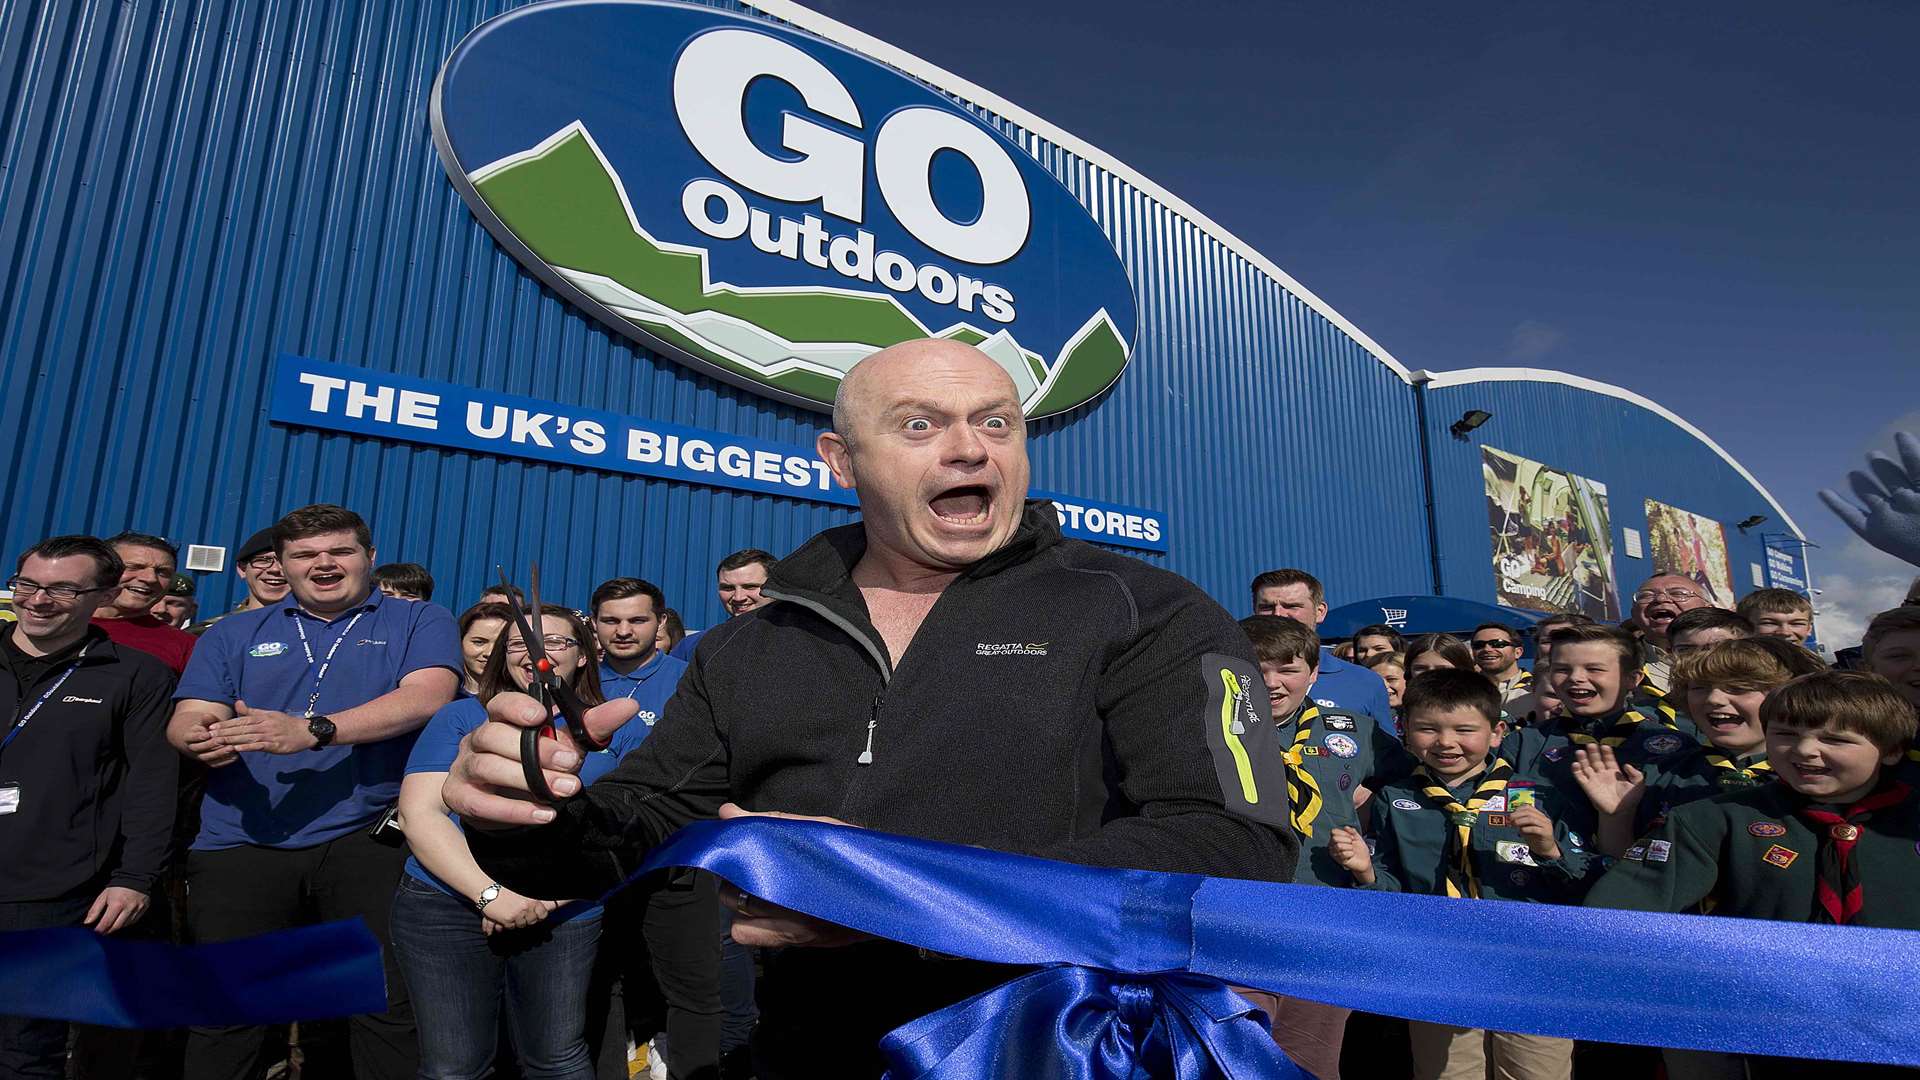 Ross Kemp will open the new GO Outdoor store in Tonbridge later this month.